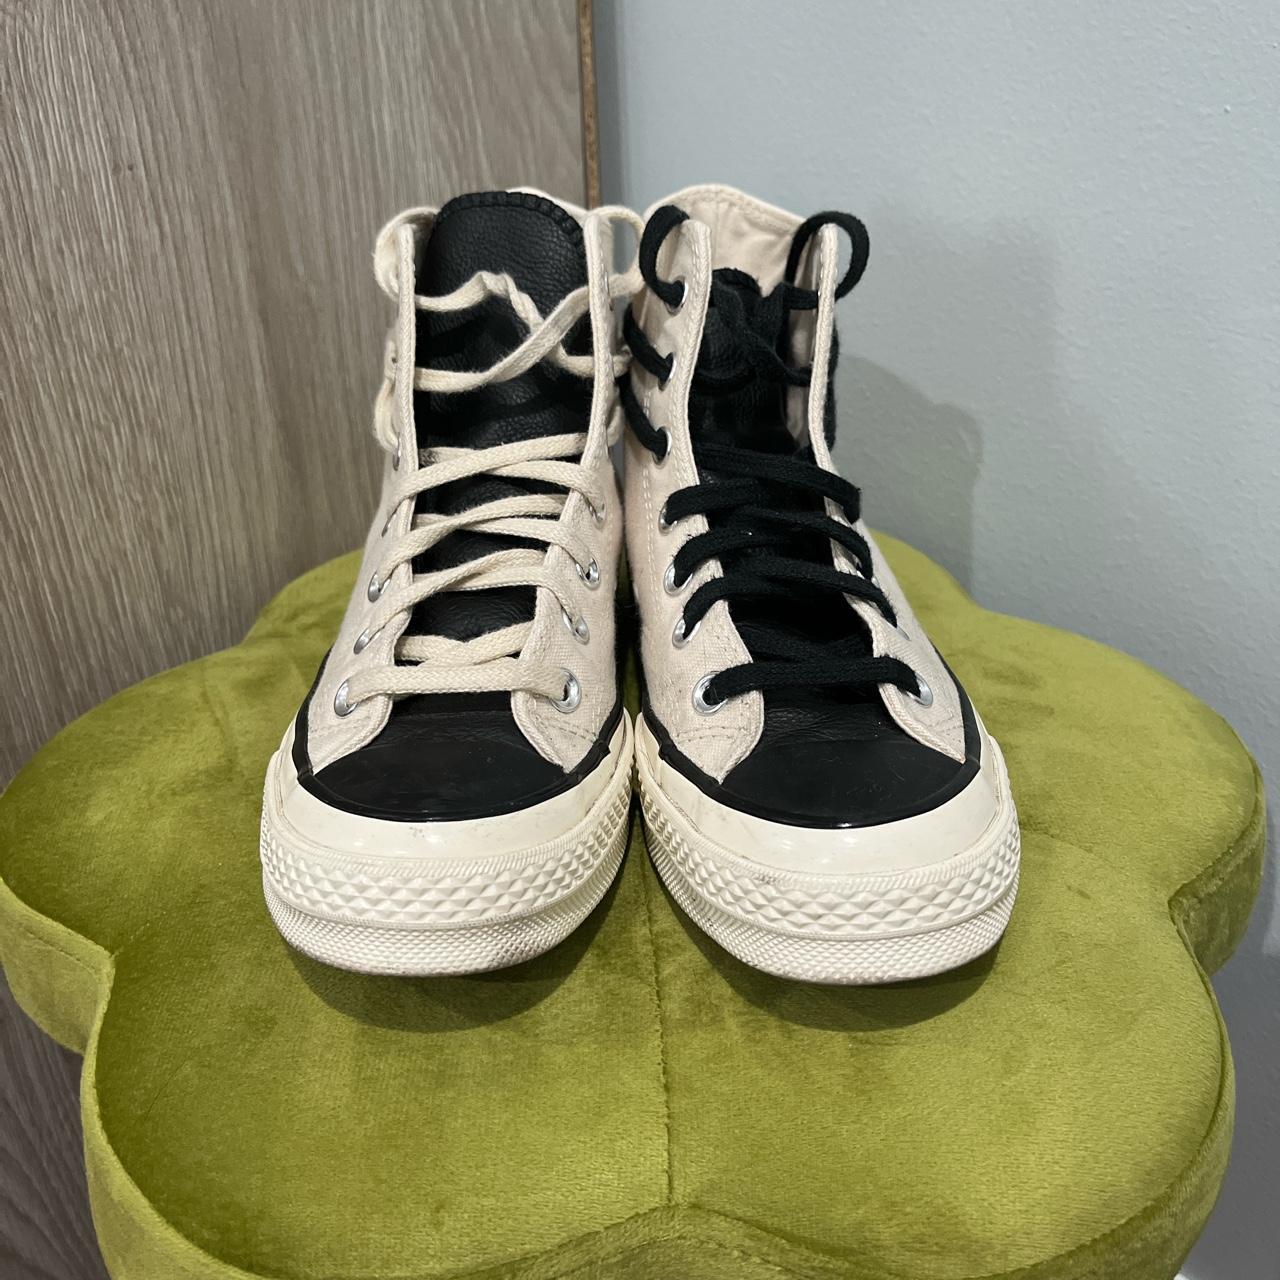 Fear of God Women's Cream and Black Trainers | Depop